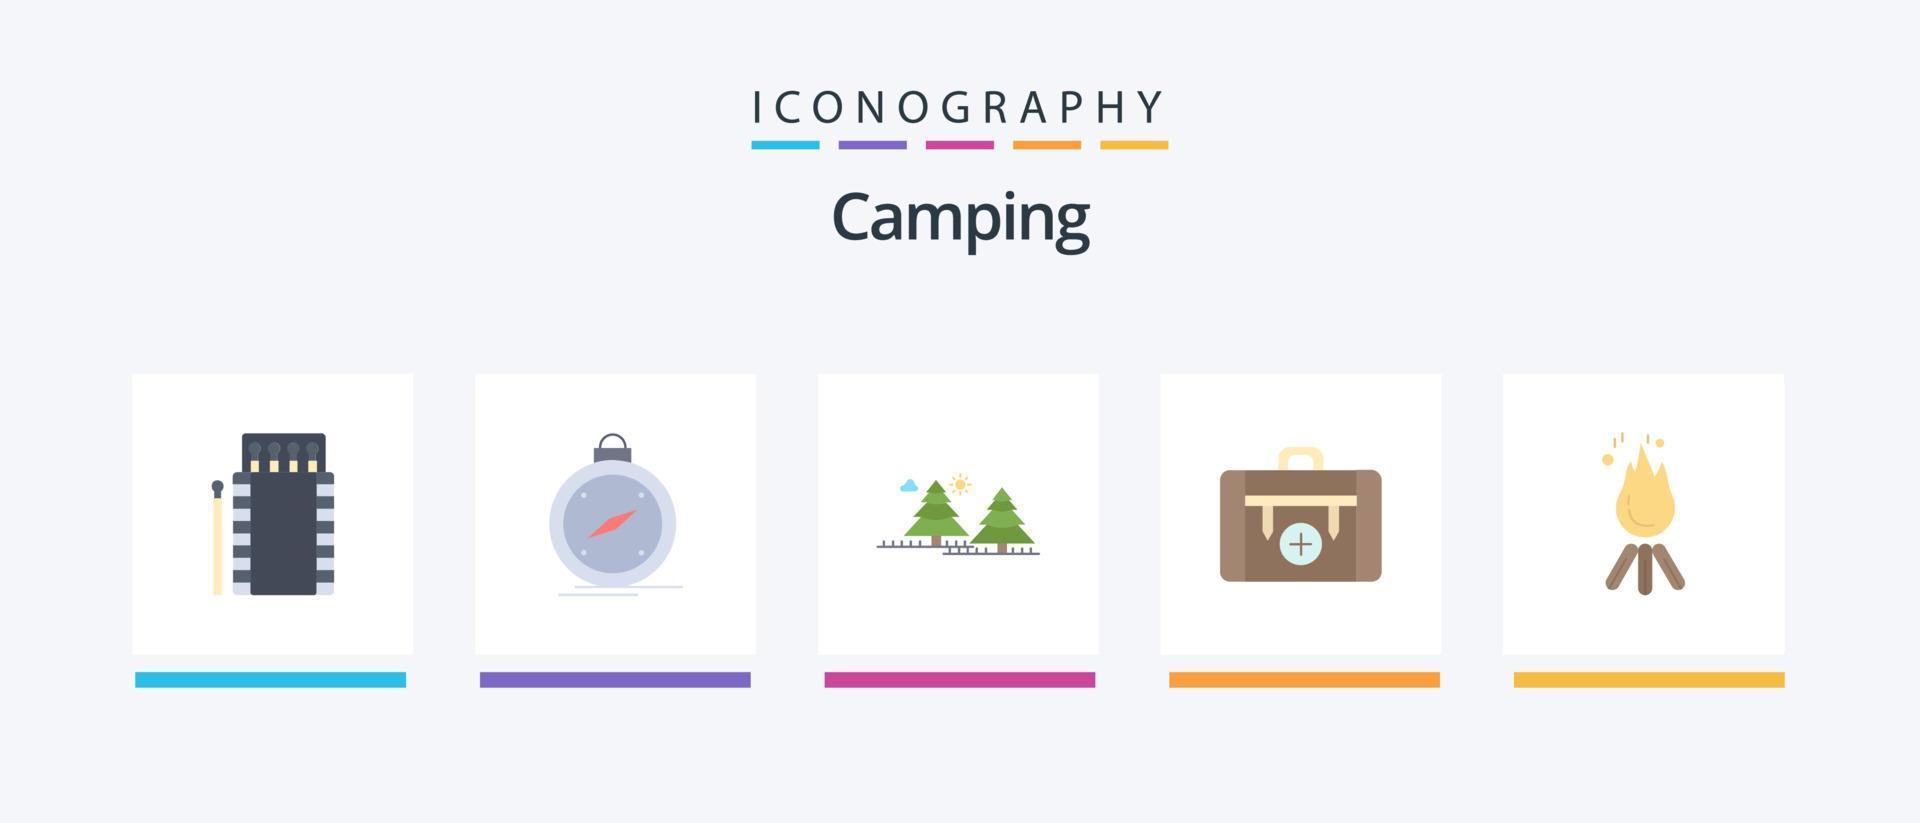 Camping Flat 5 Icon Pack Including health. bag. gps. pines. jungle. Creative Icons Design vector